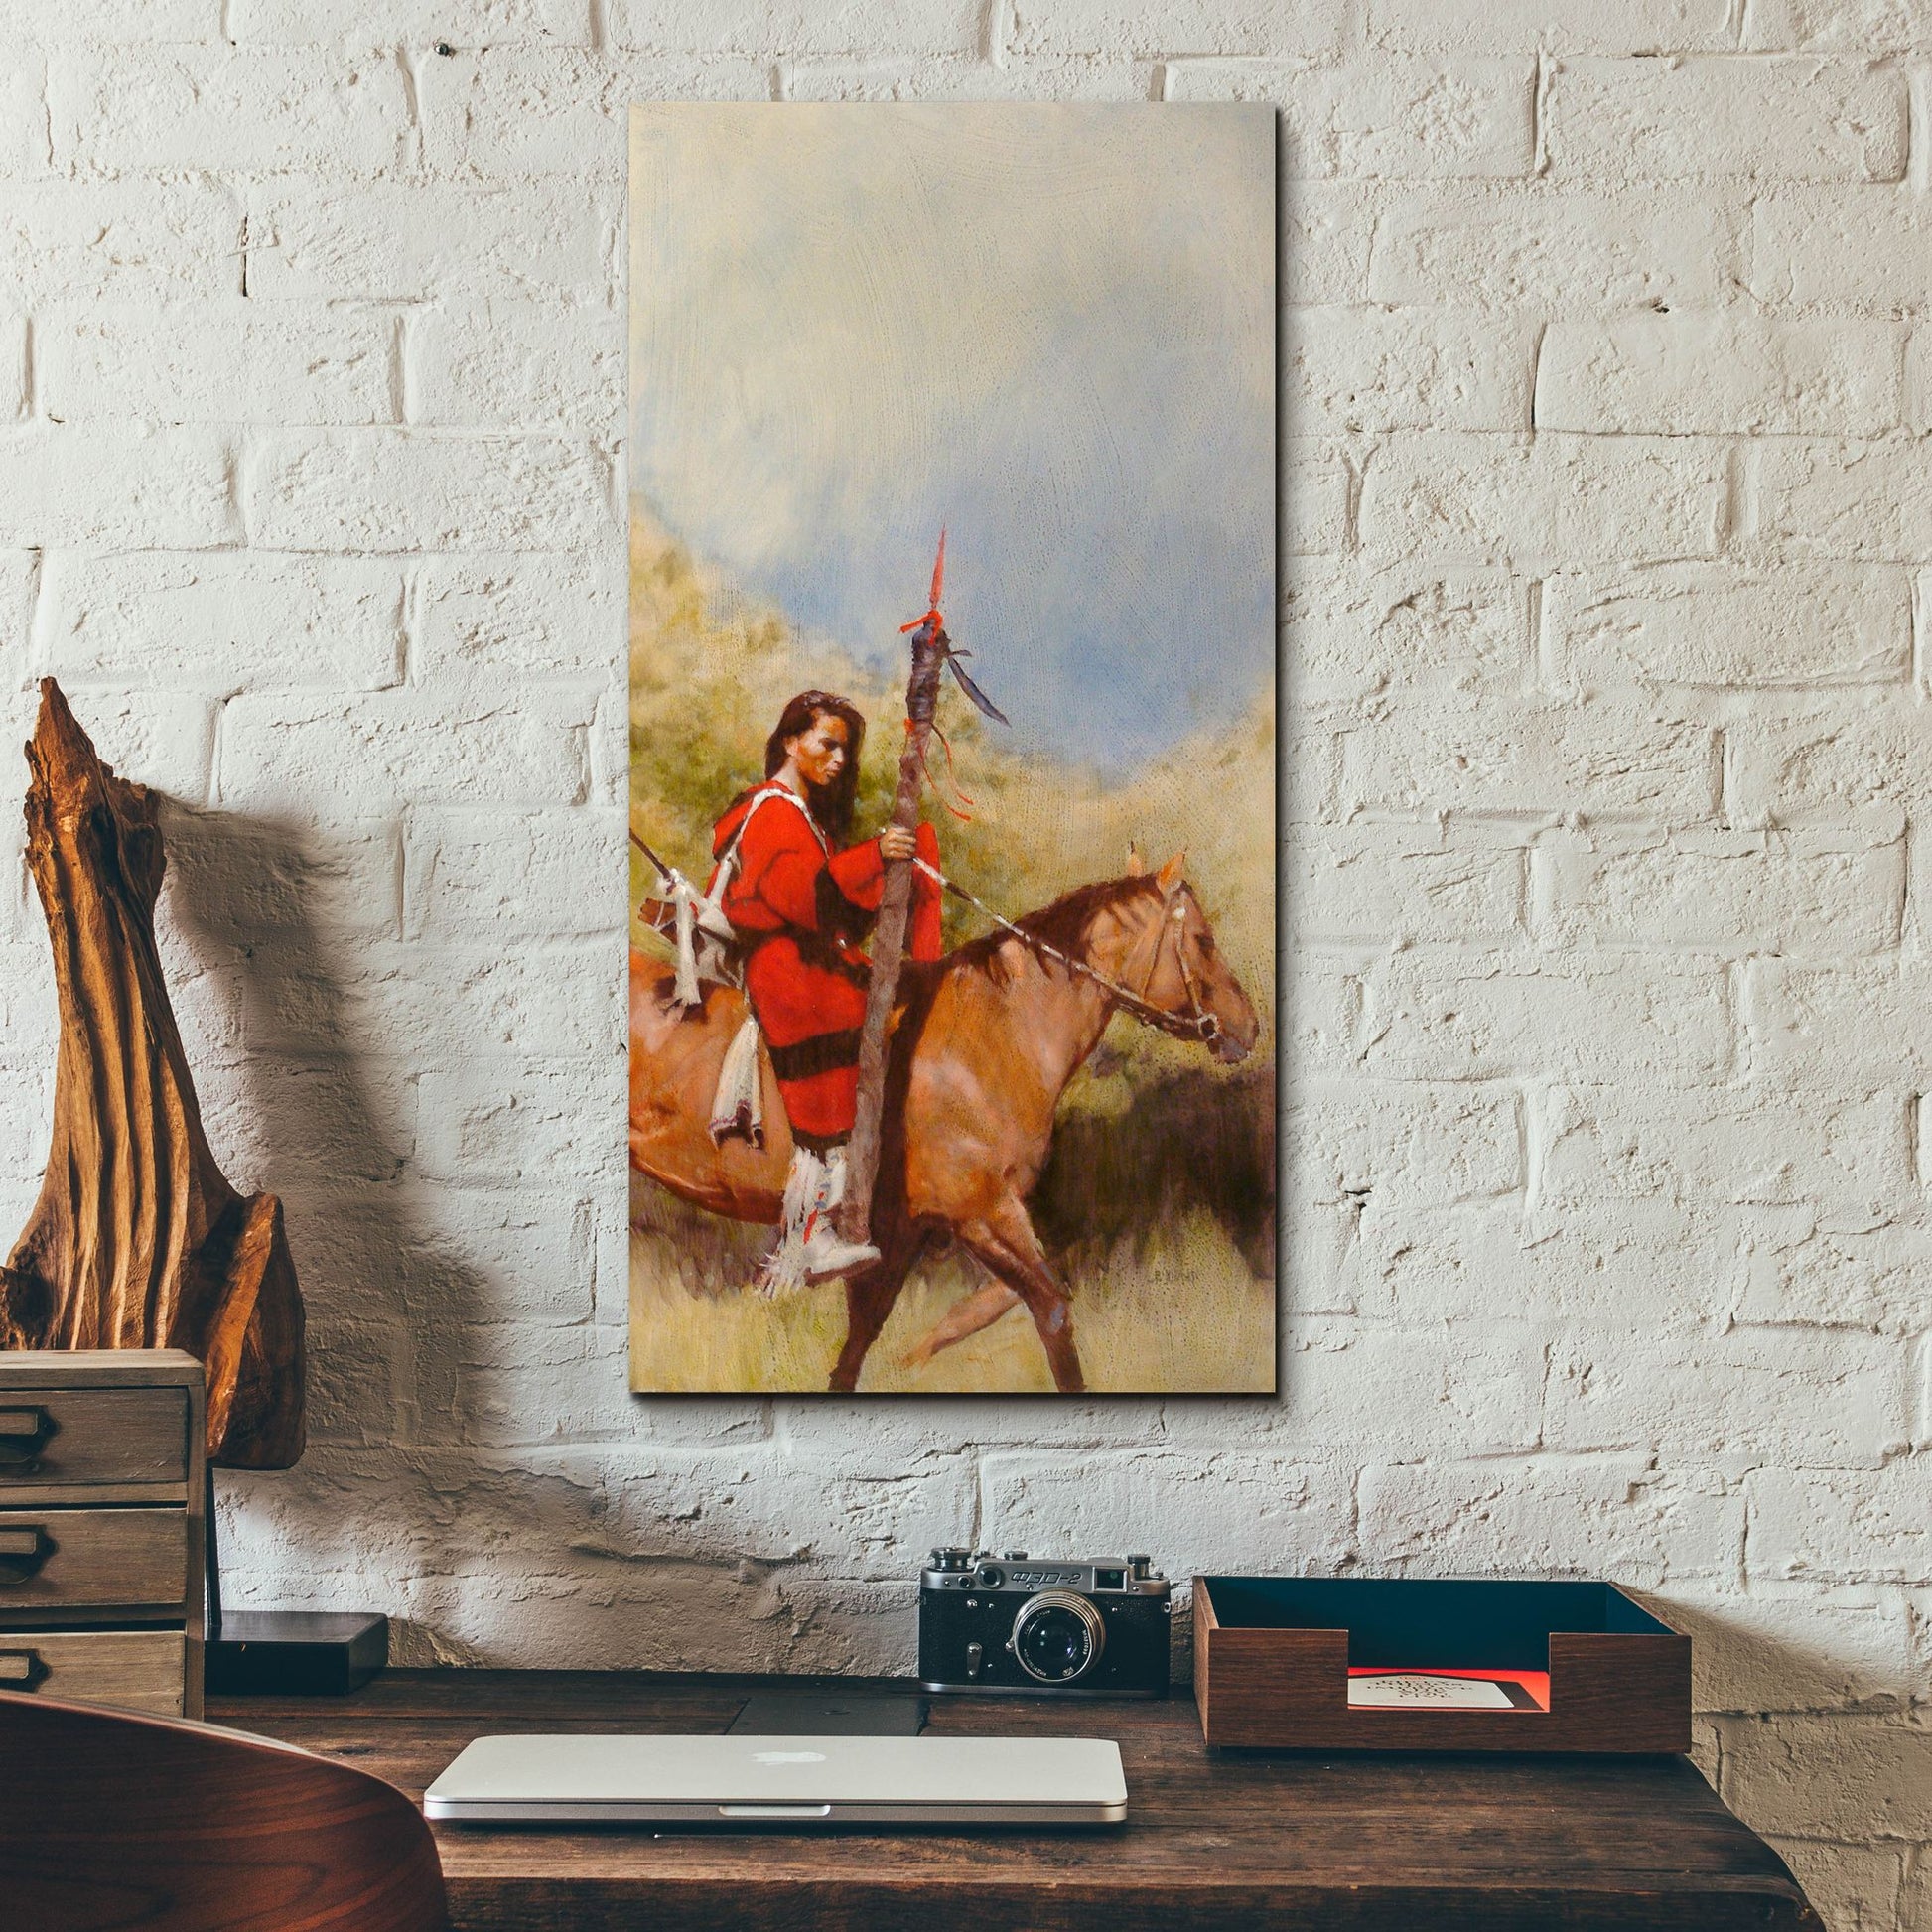 Epic Art 'Horse And Rider At A Walk' by J. E. Knauf, Acrylic Glass Wall Art,12x24